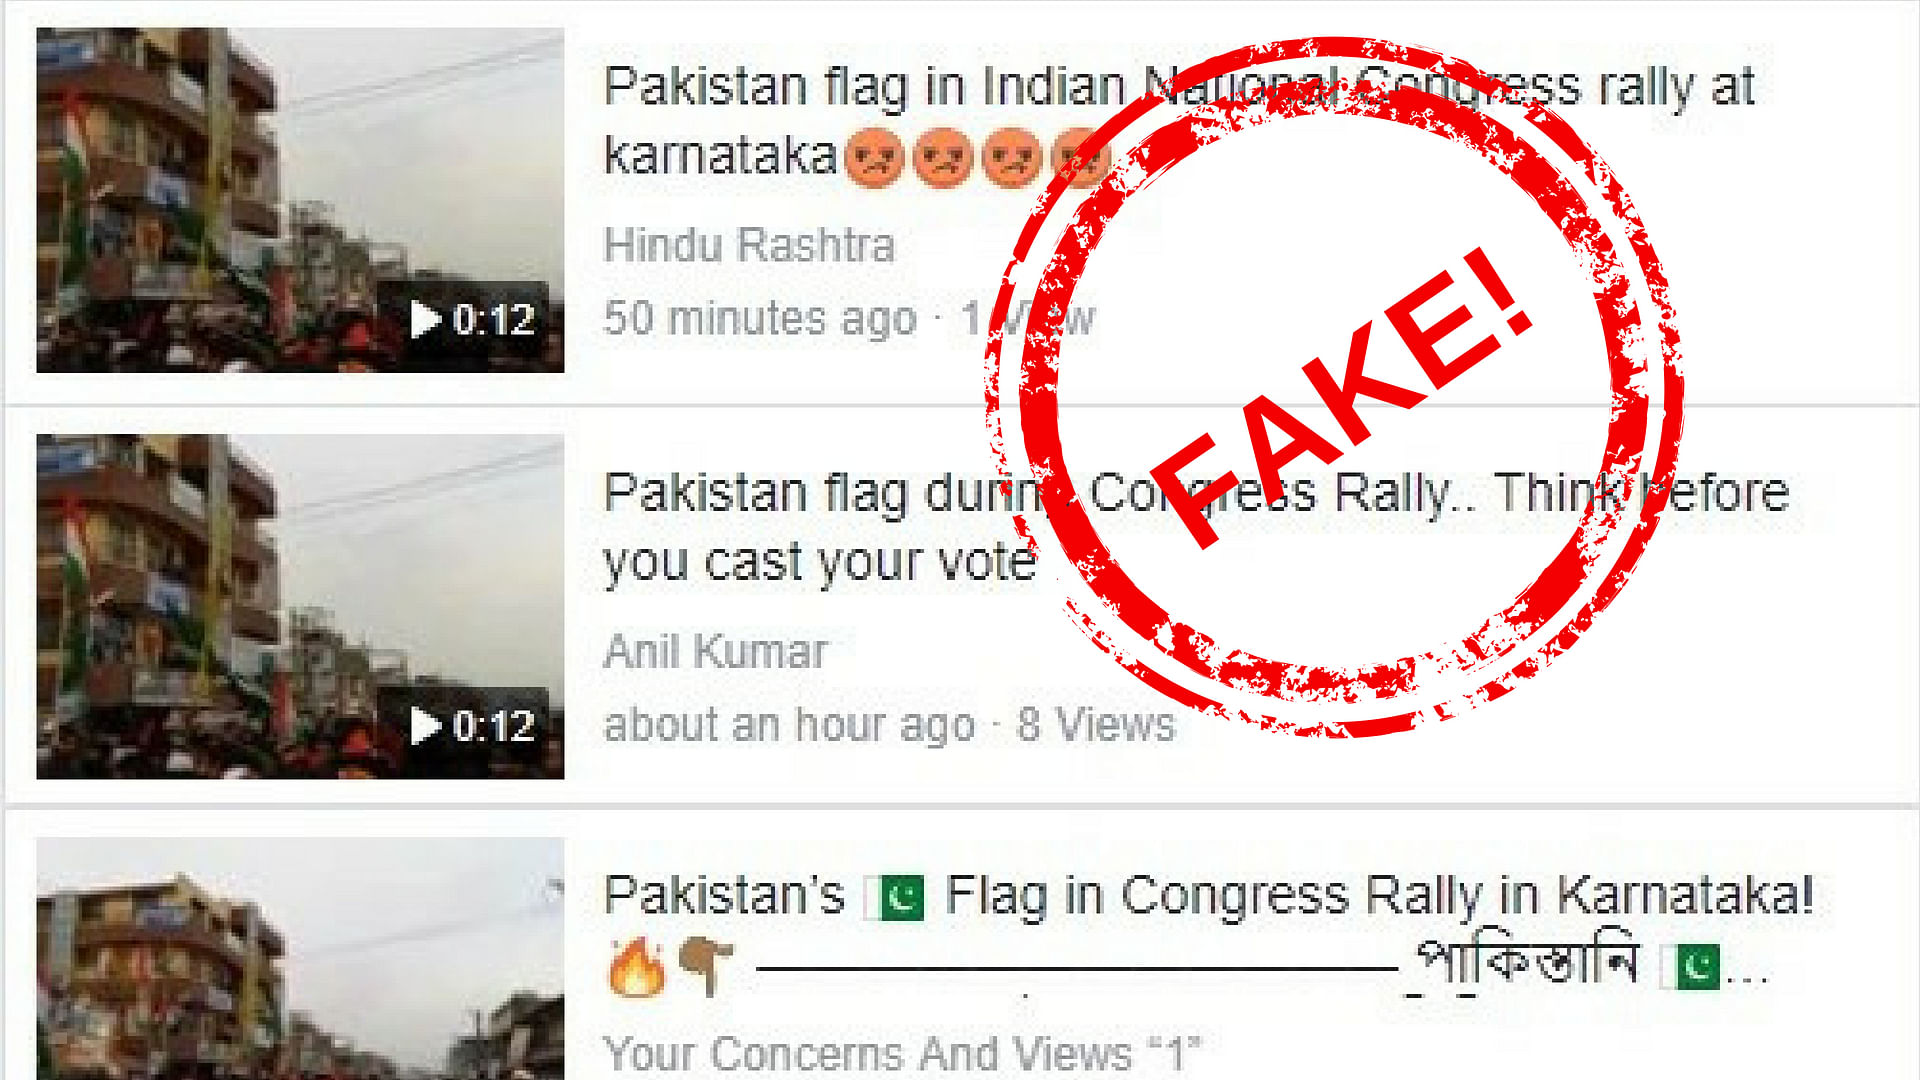  The video shows a green coloured flag being waved. The flag that was waved at this rally was NOT a Pakistani flag.